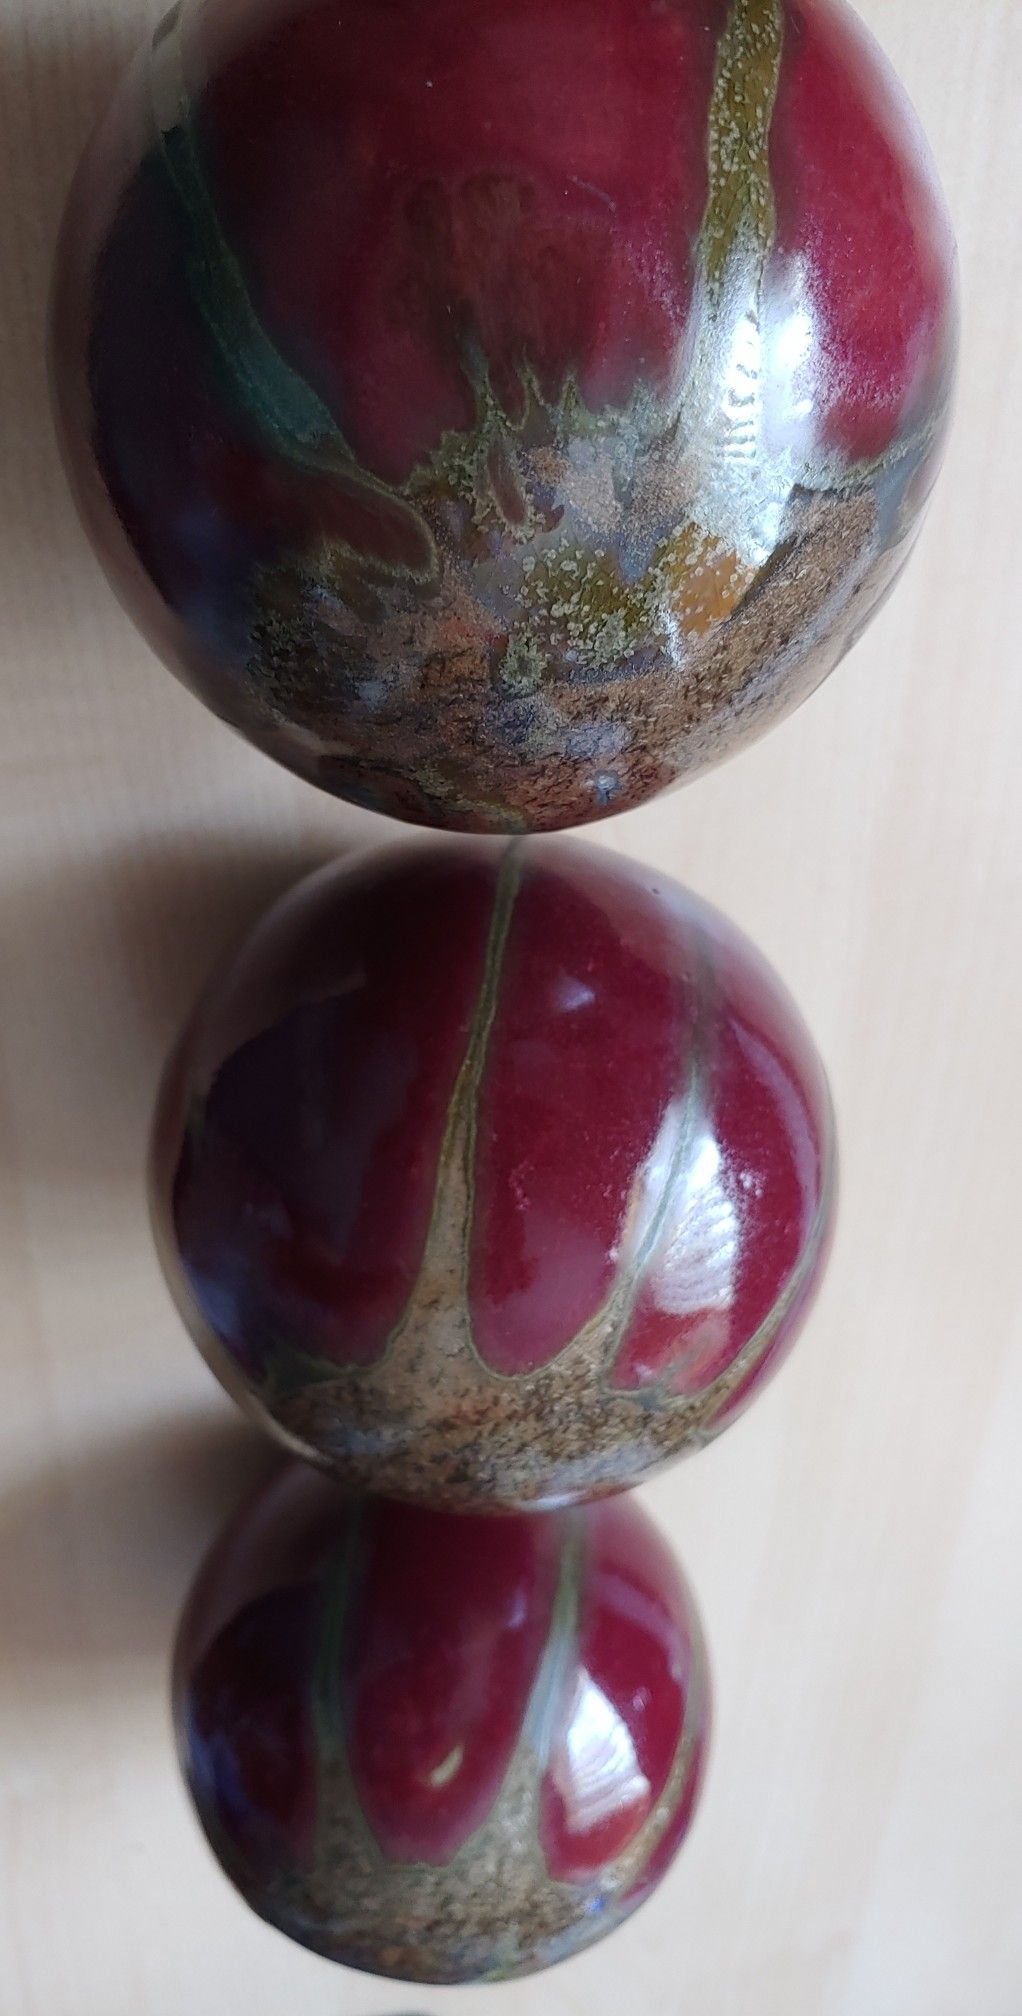 MCM Space Age Ceramic Orbs Set of 3 Glazed Red Green Crackle Drip Rare Table Sculpture Spheres Globes Vintage 60s 70s Glossy Mid Century Set